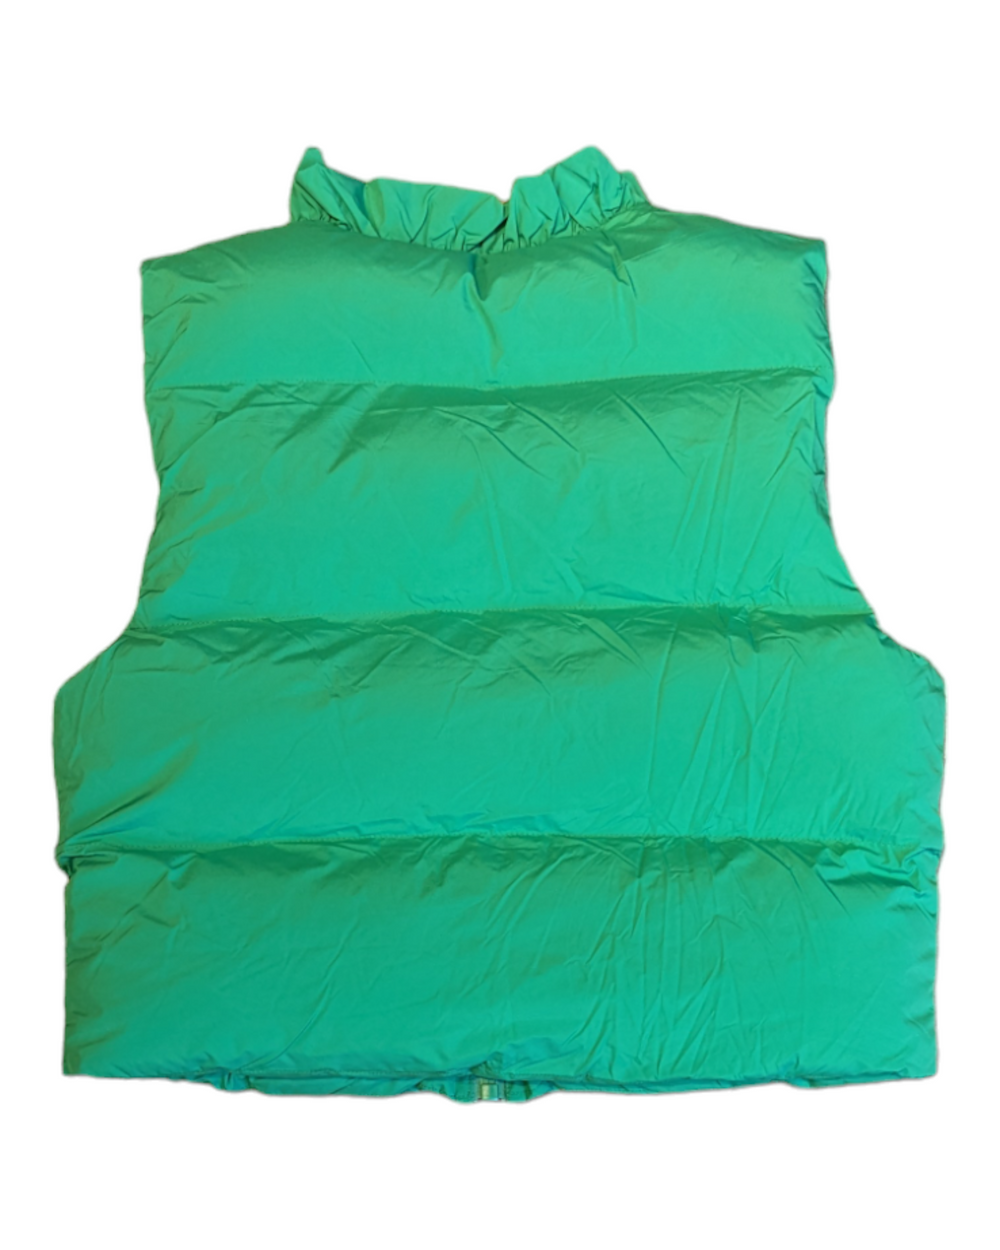 back flat view of the puffer vest